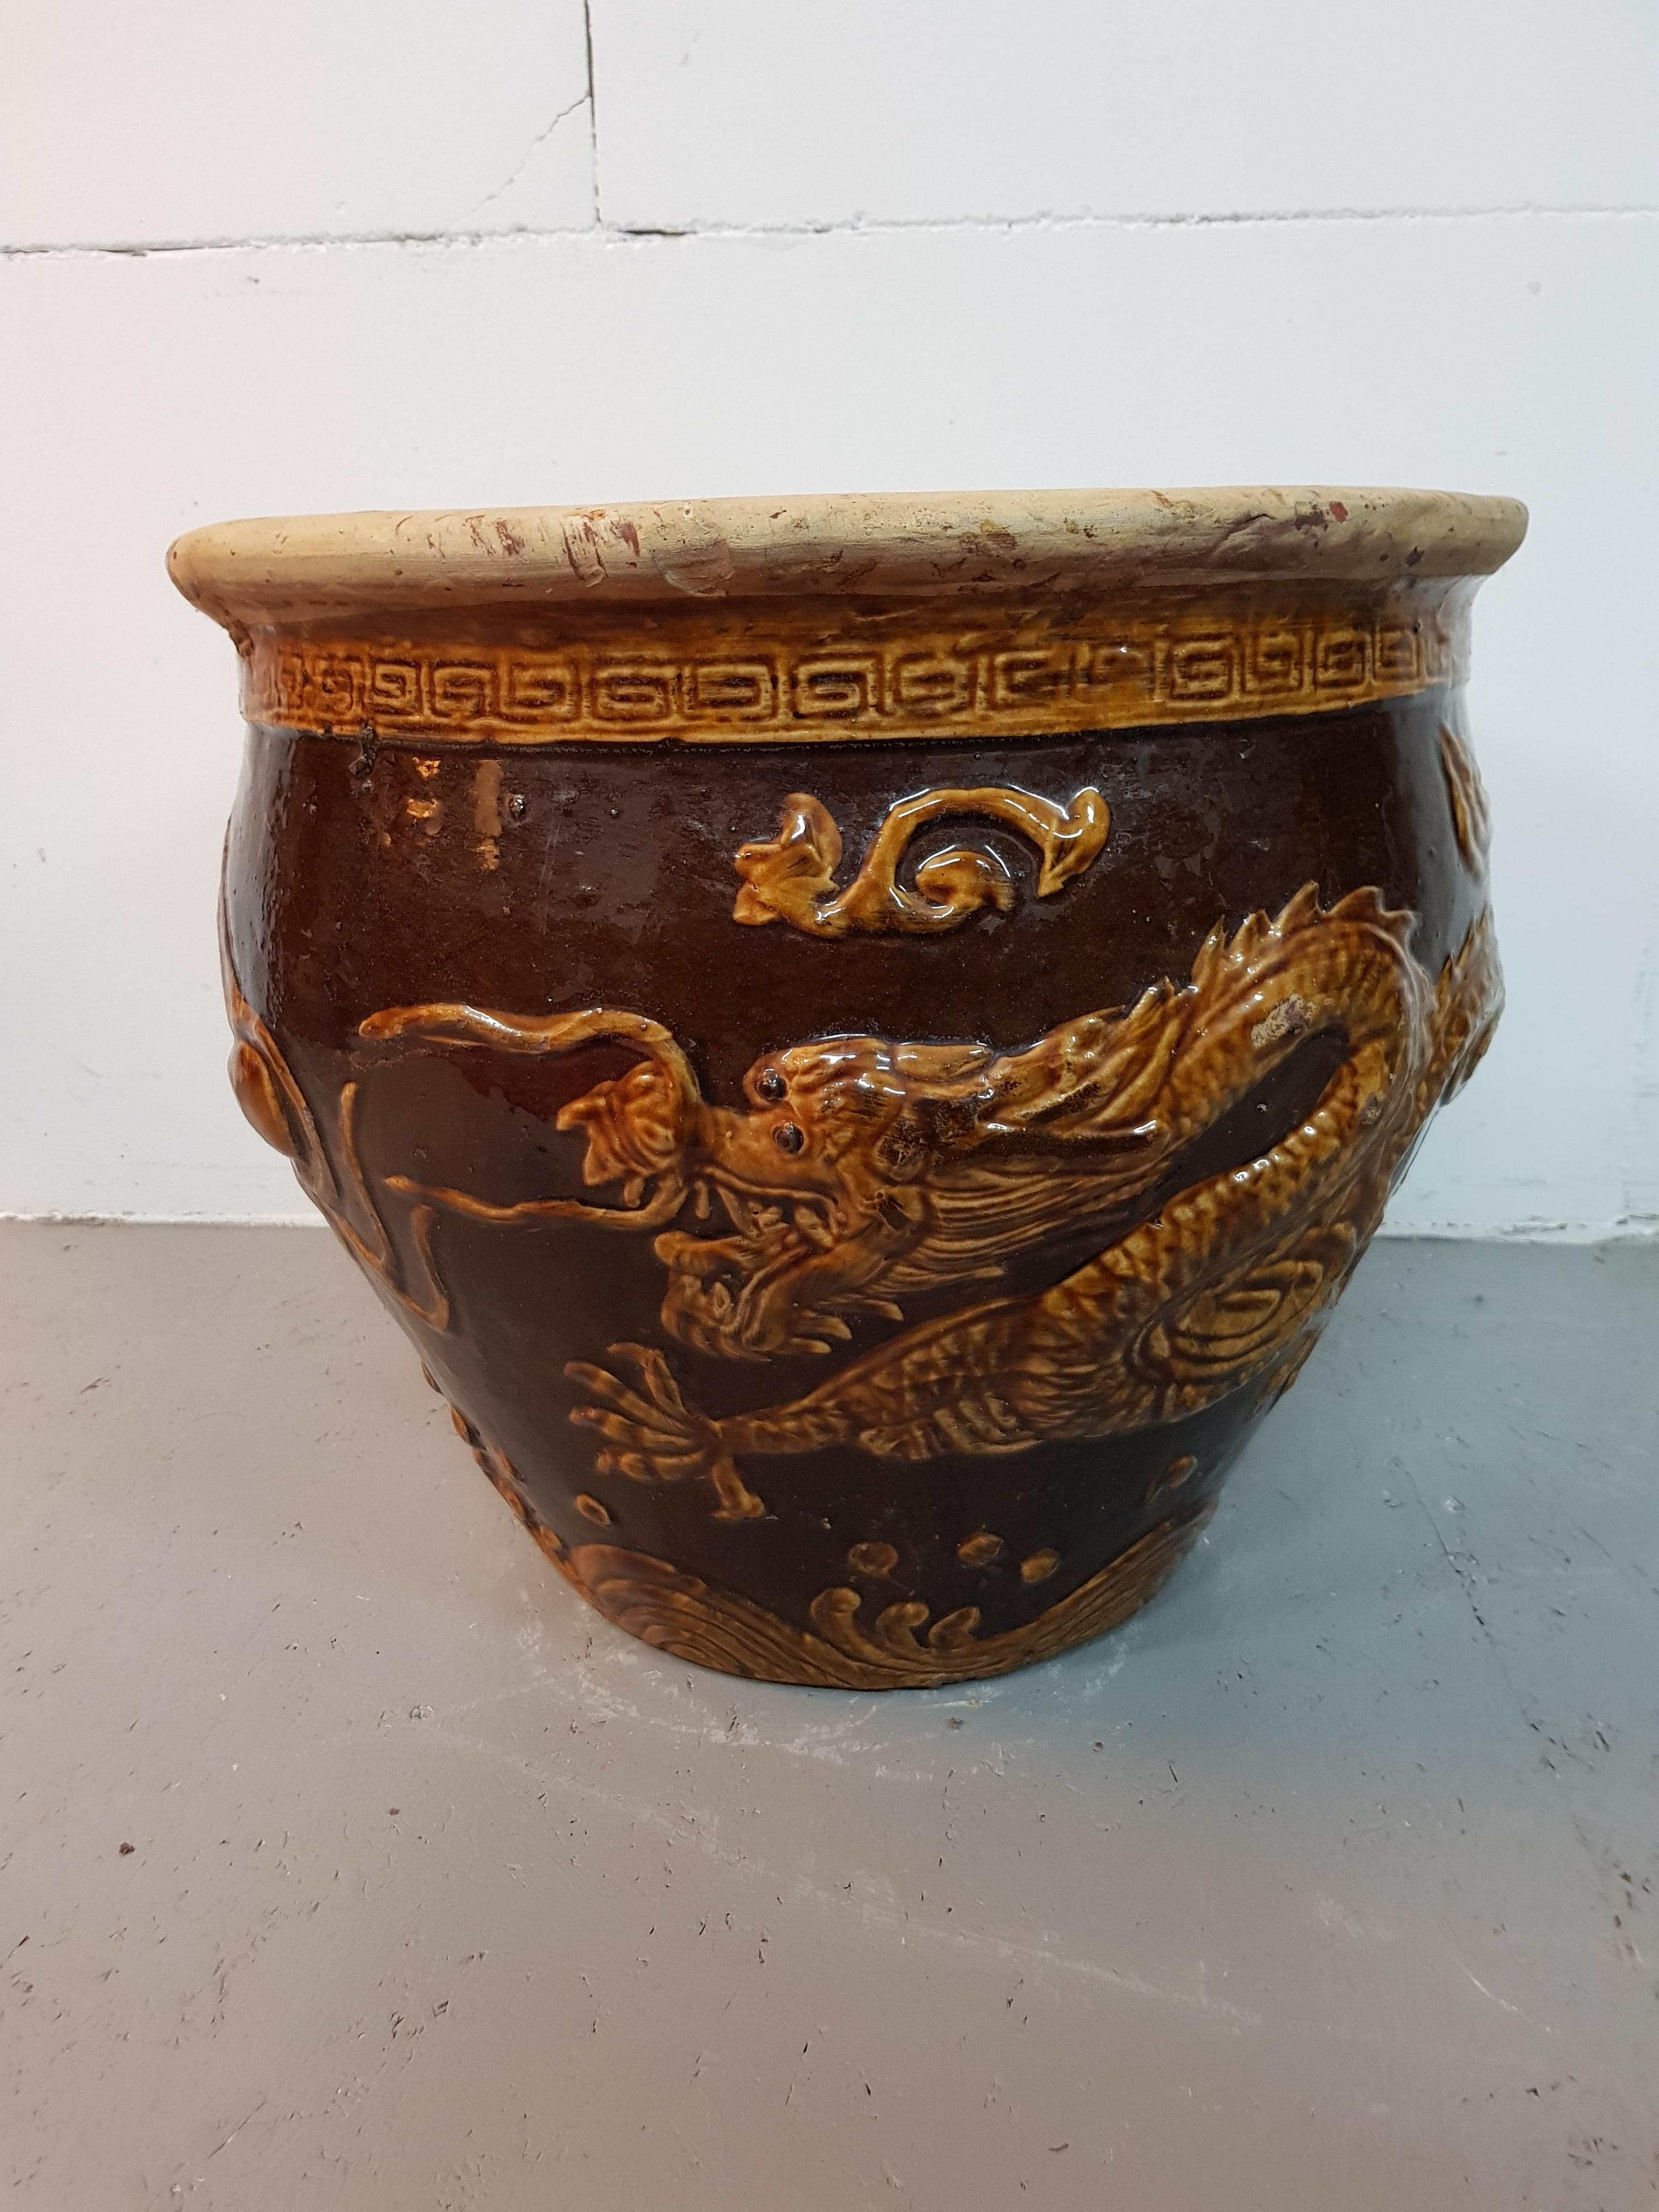 Chinese earthenware flower box with relief of dragons and is marked but unknown and further in a good condition with slight traces of use, second half of 20th century.

The measurements are,
Depth 47 cm/ 18.5 inch.
Width 47 cm/ 18.5